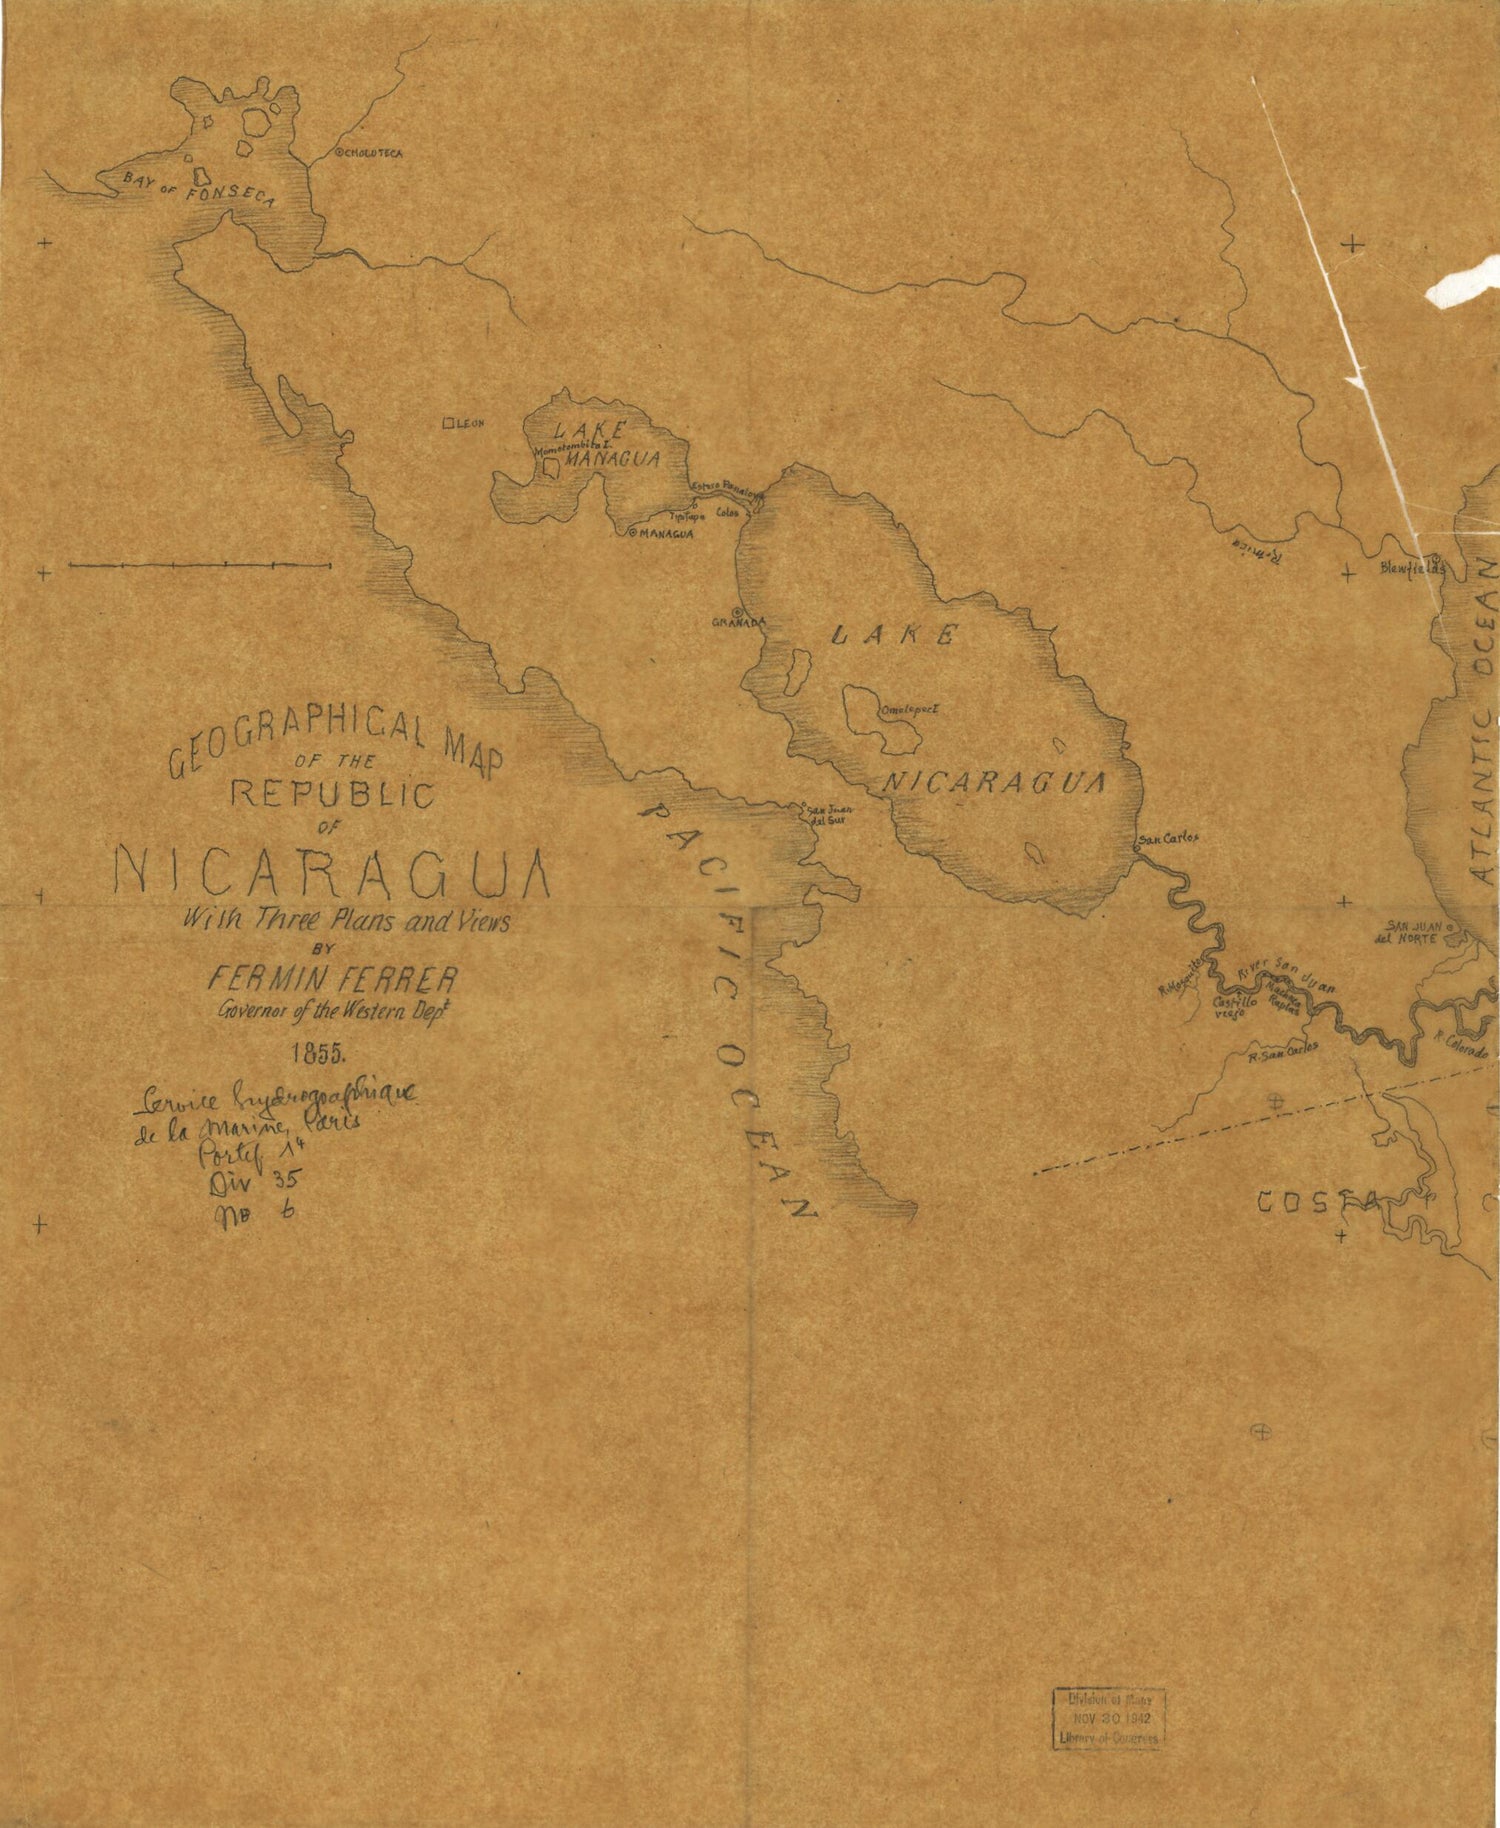 This old map of Geographical Map of the Republic of Nicaragua from 1855 was created by Fermin Ferrer in 1855